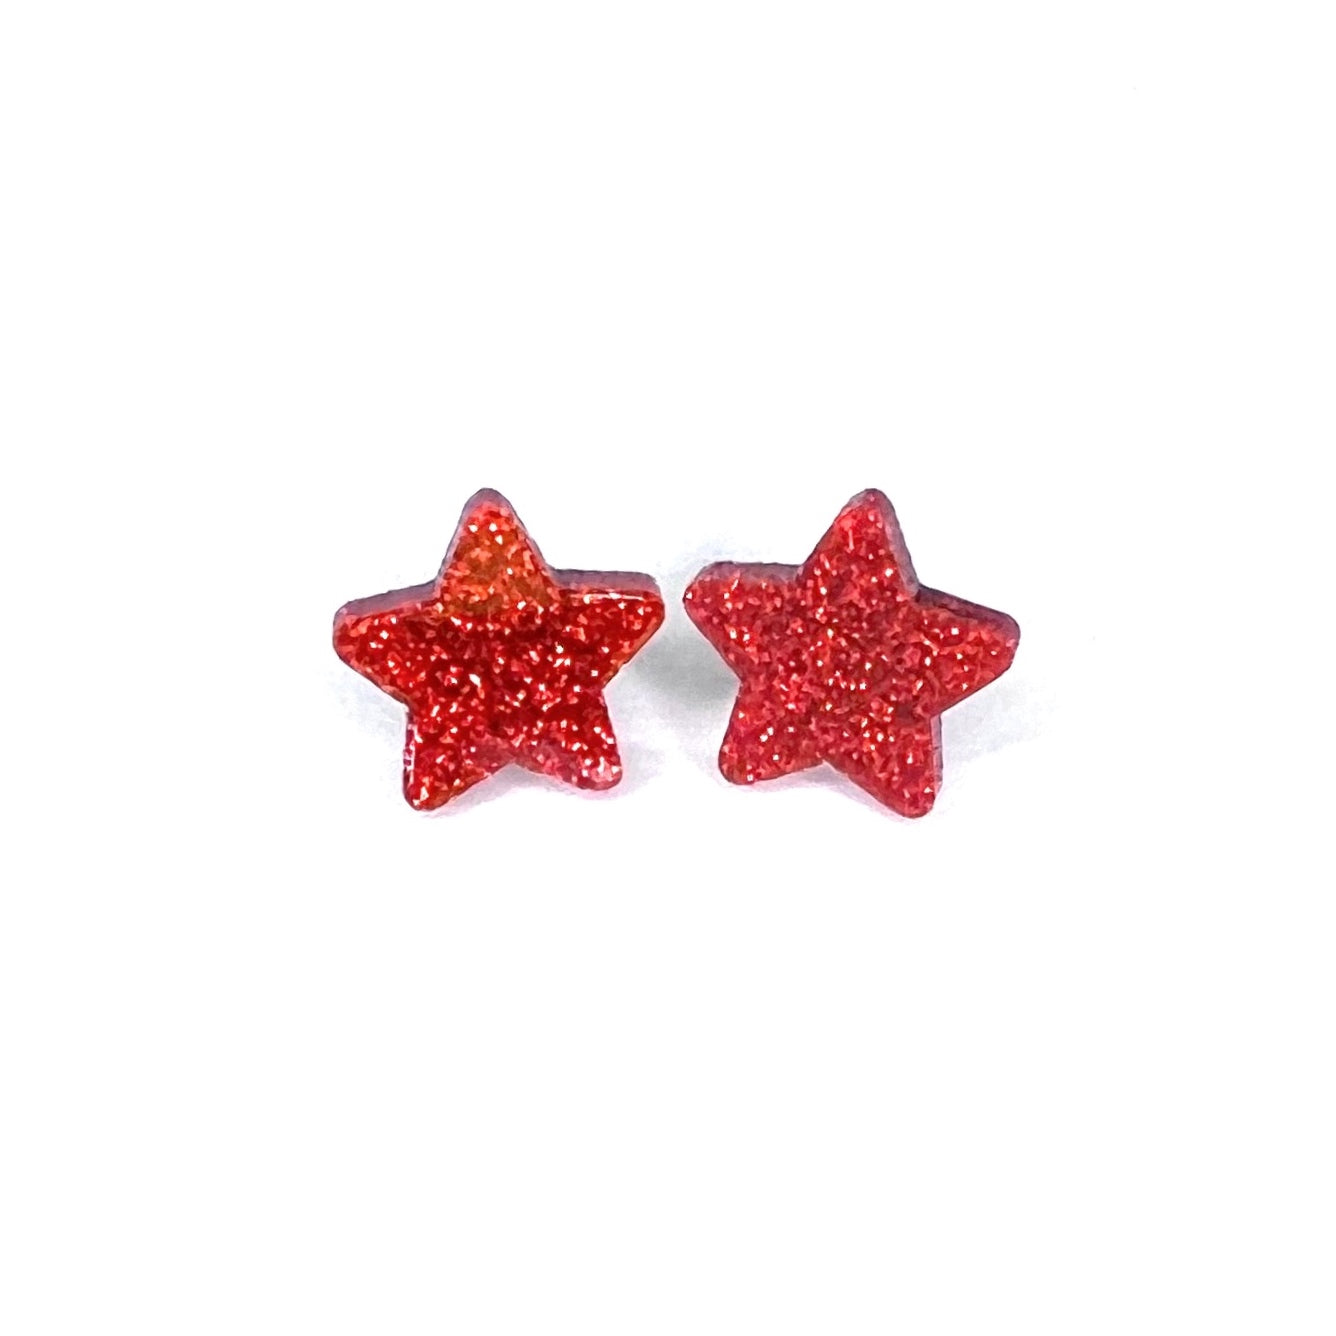 THE LITTLE STAR in Red Glitter